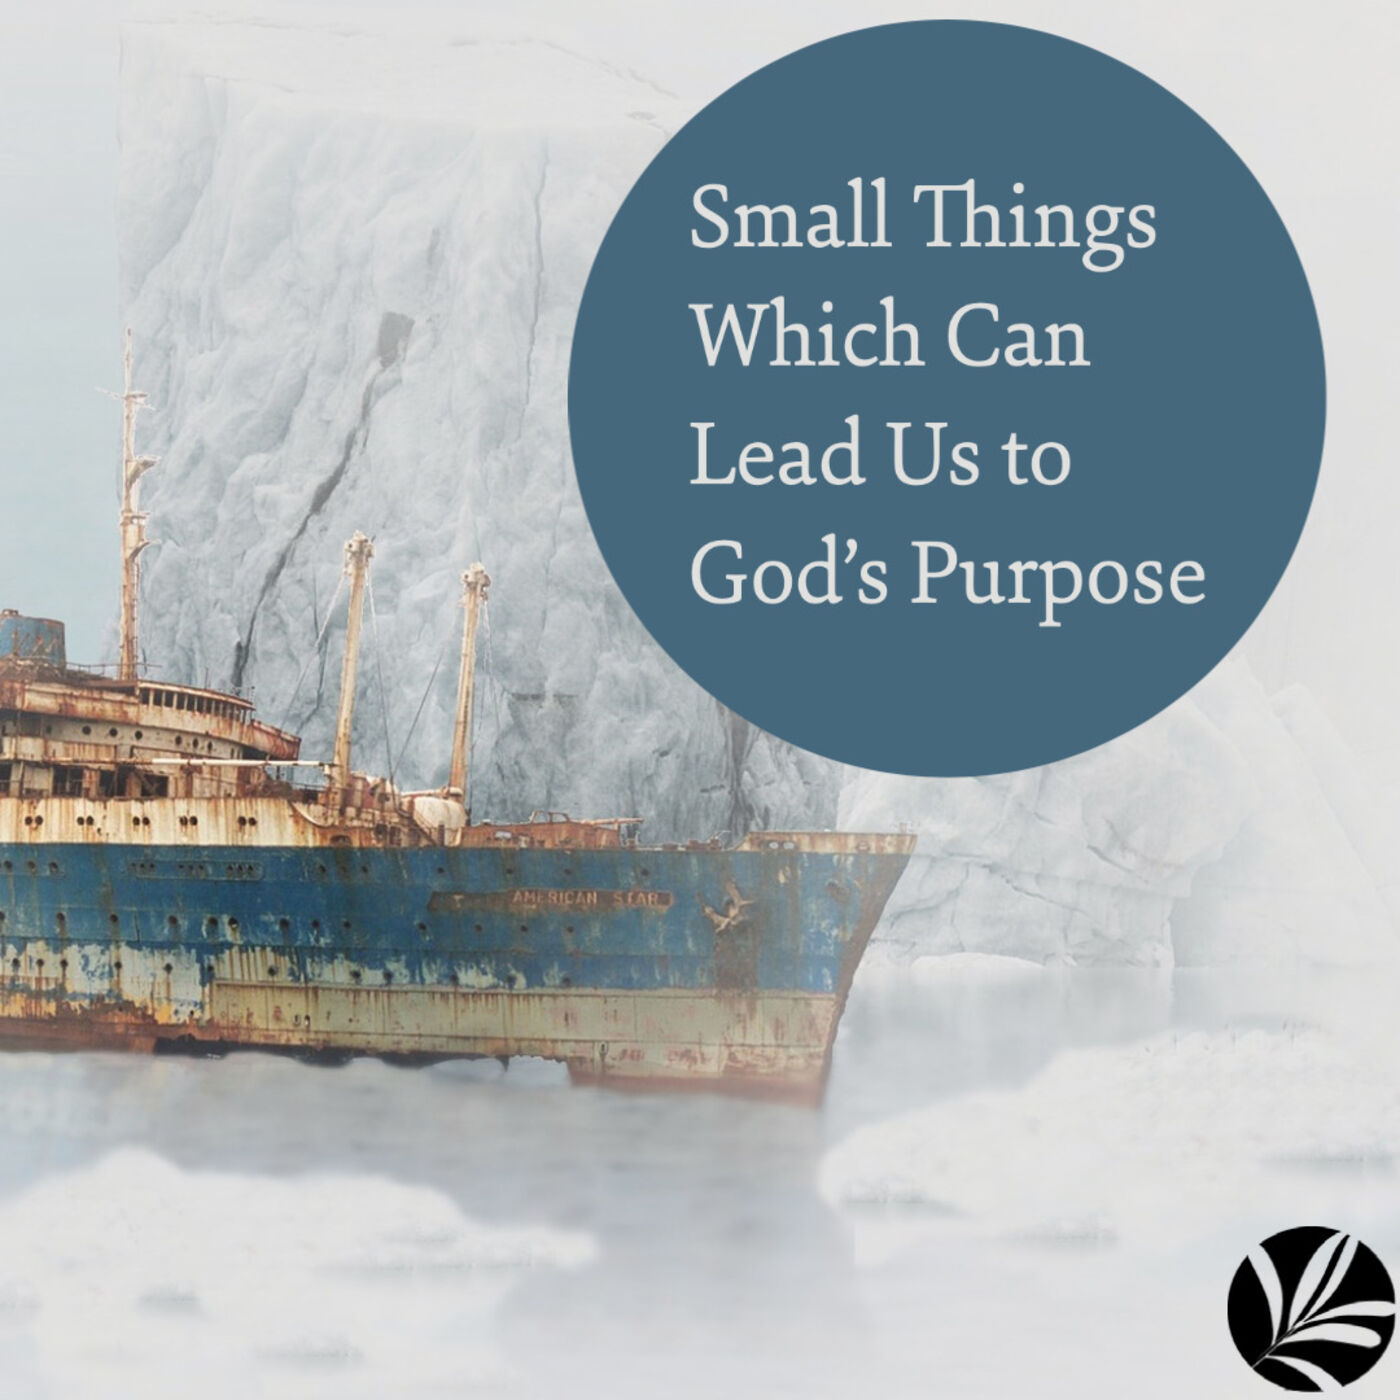 Small Things Which Can Lead Us to God's Purpose